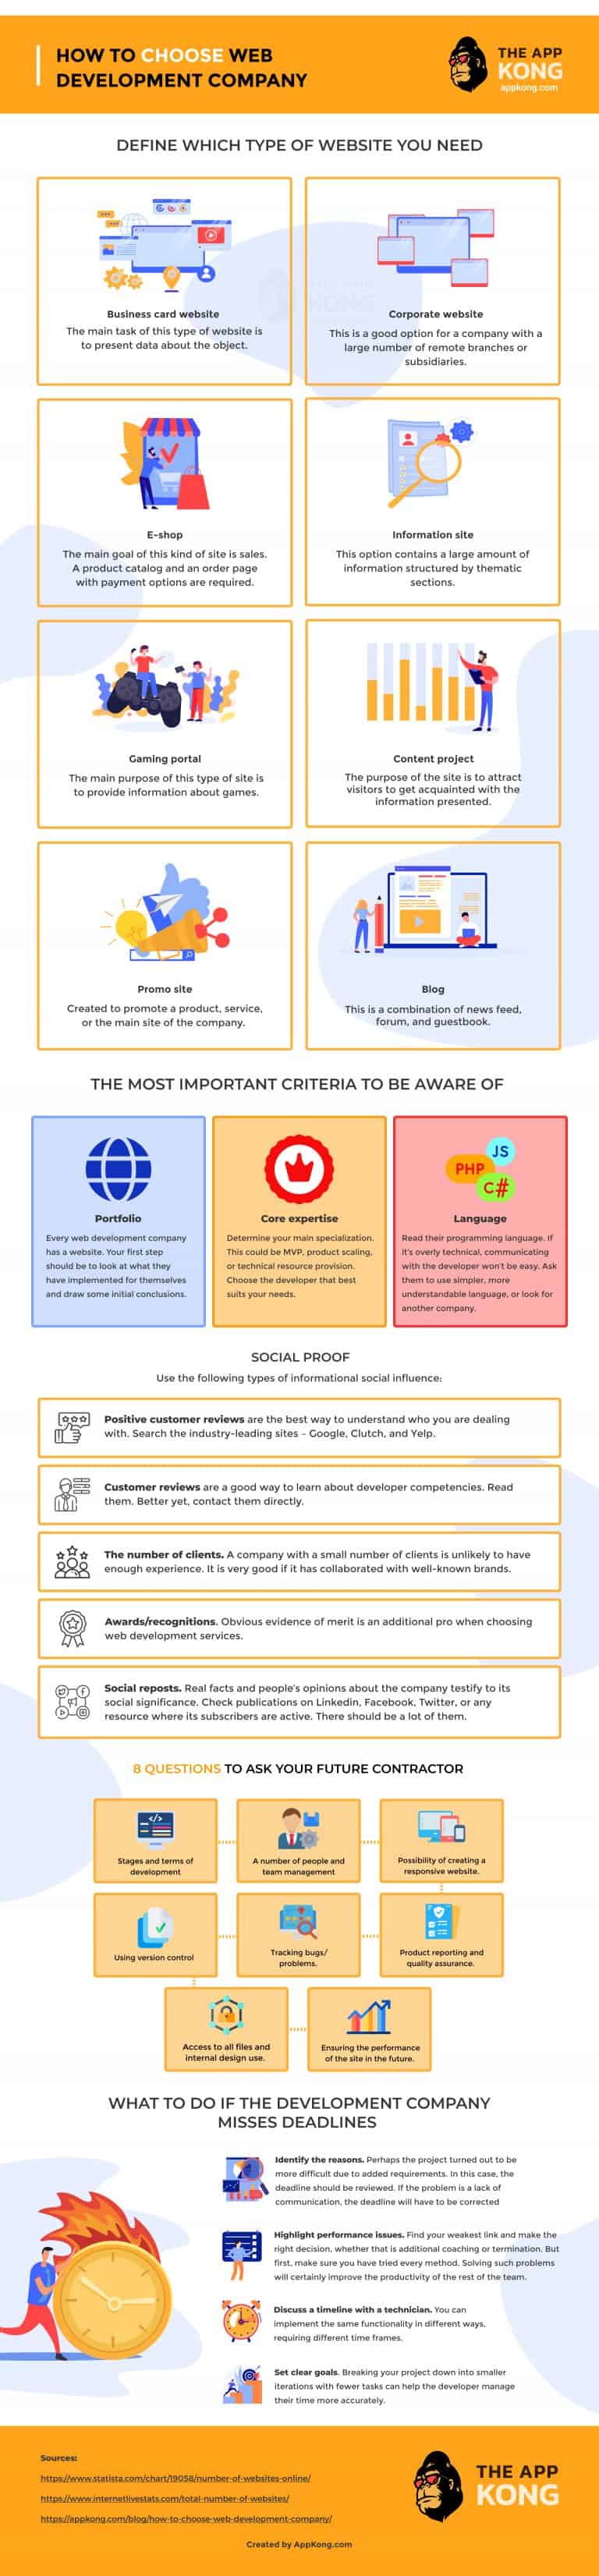 how-to-choose-web-development-company-Infographic